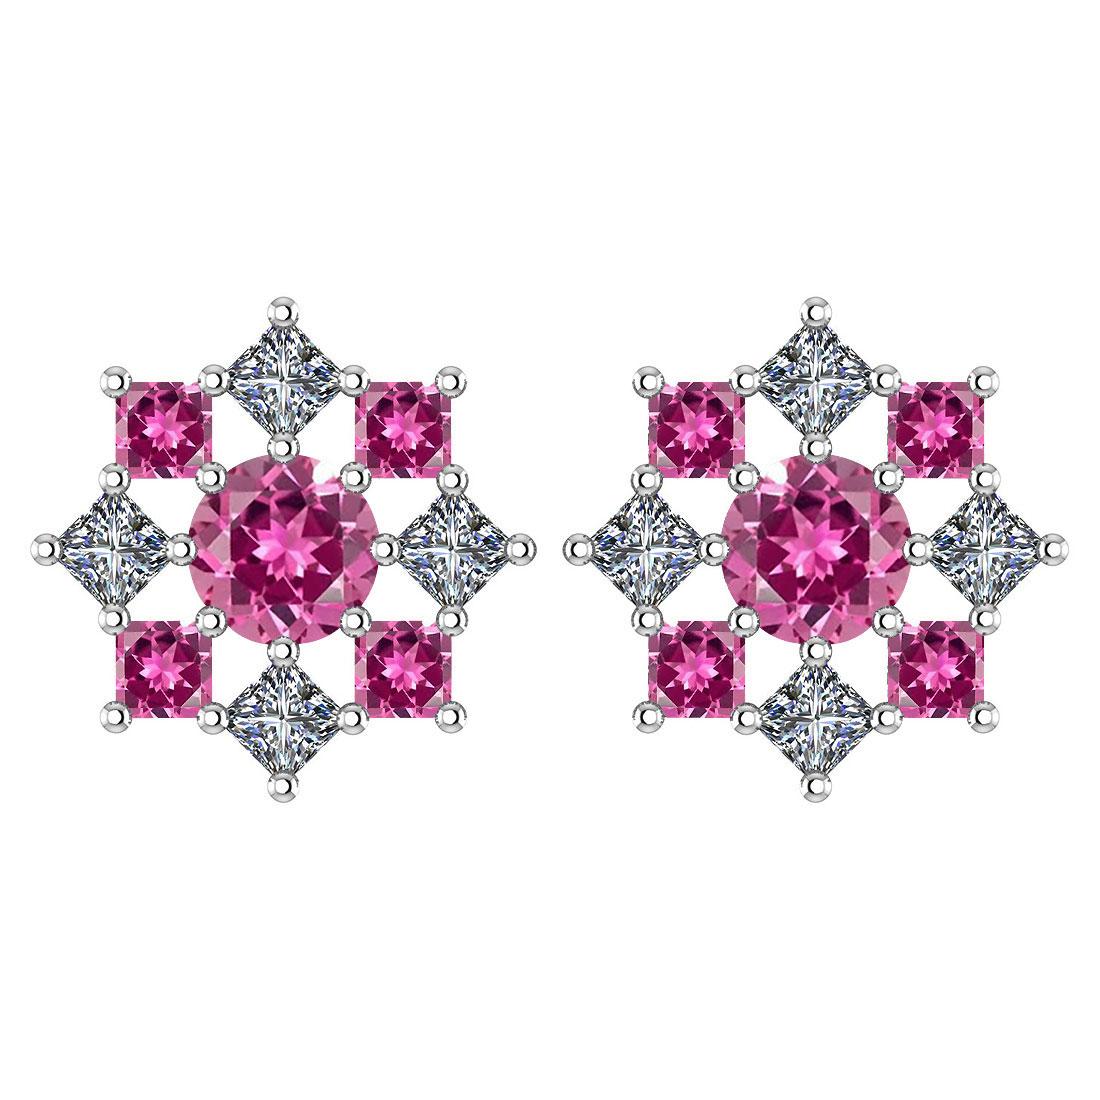 Certified 1.46 Ctw Pink Tourmaline And Diamond 14k White Gold Halo Stud Earring